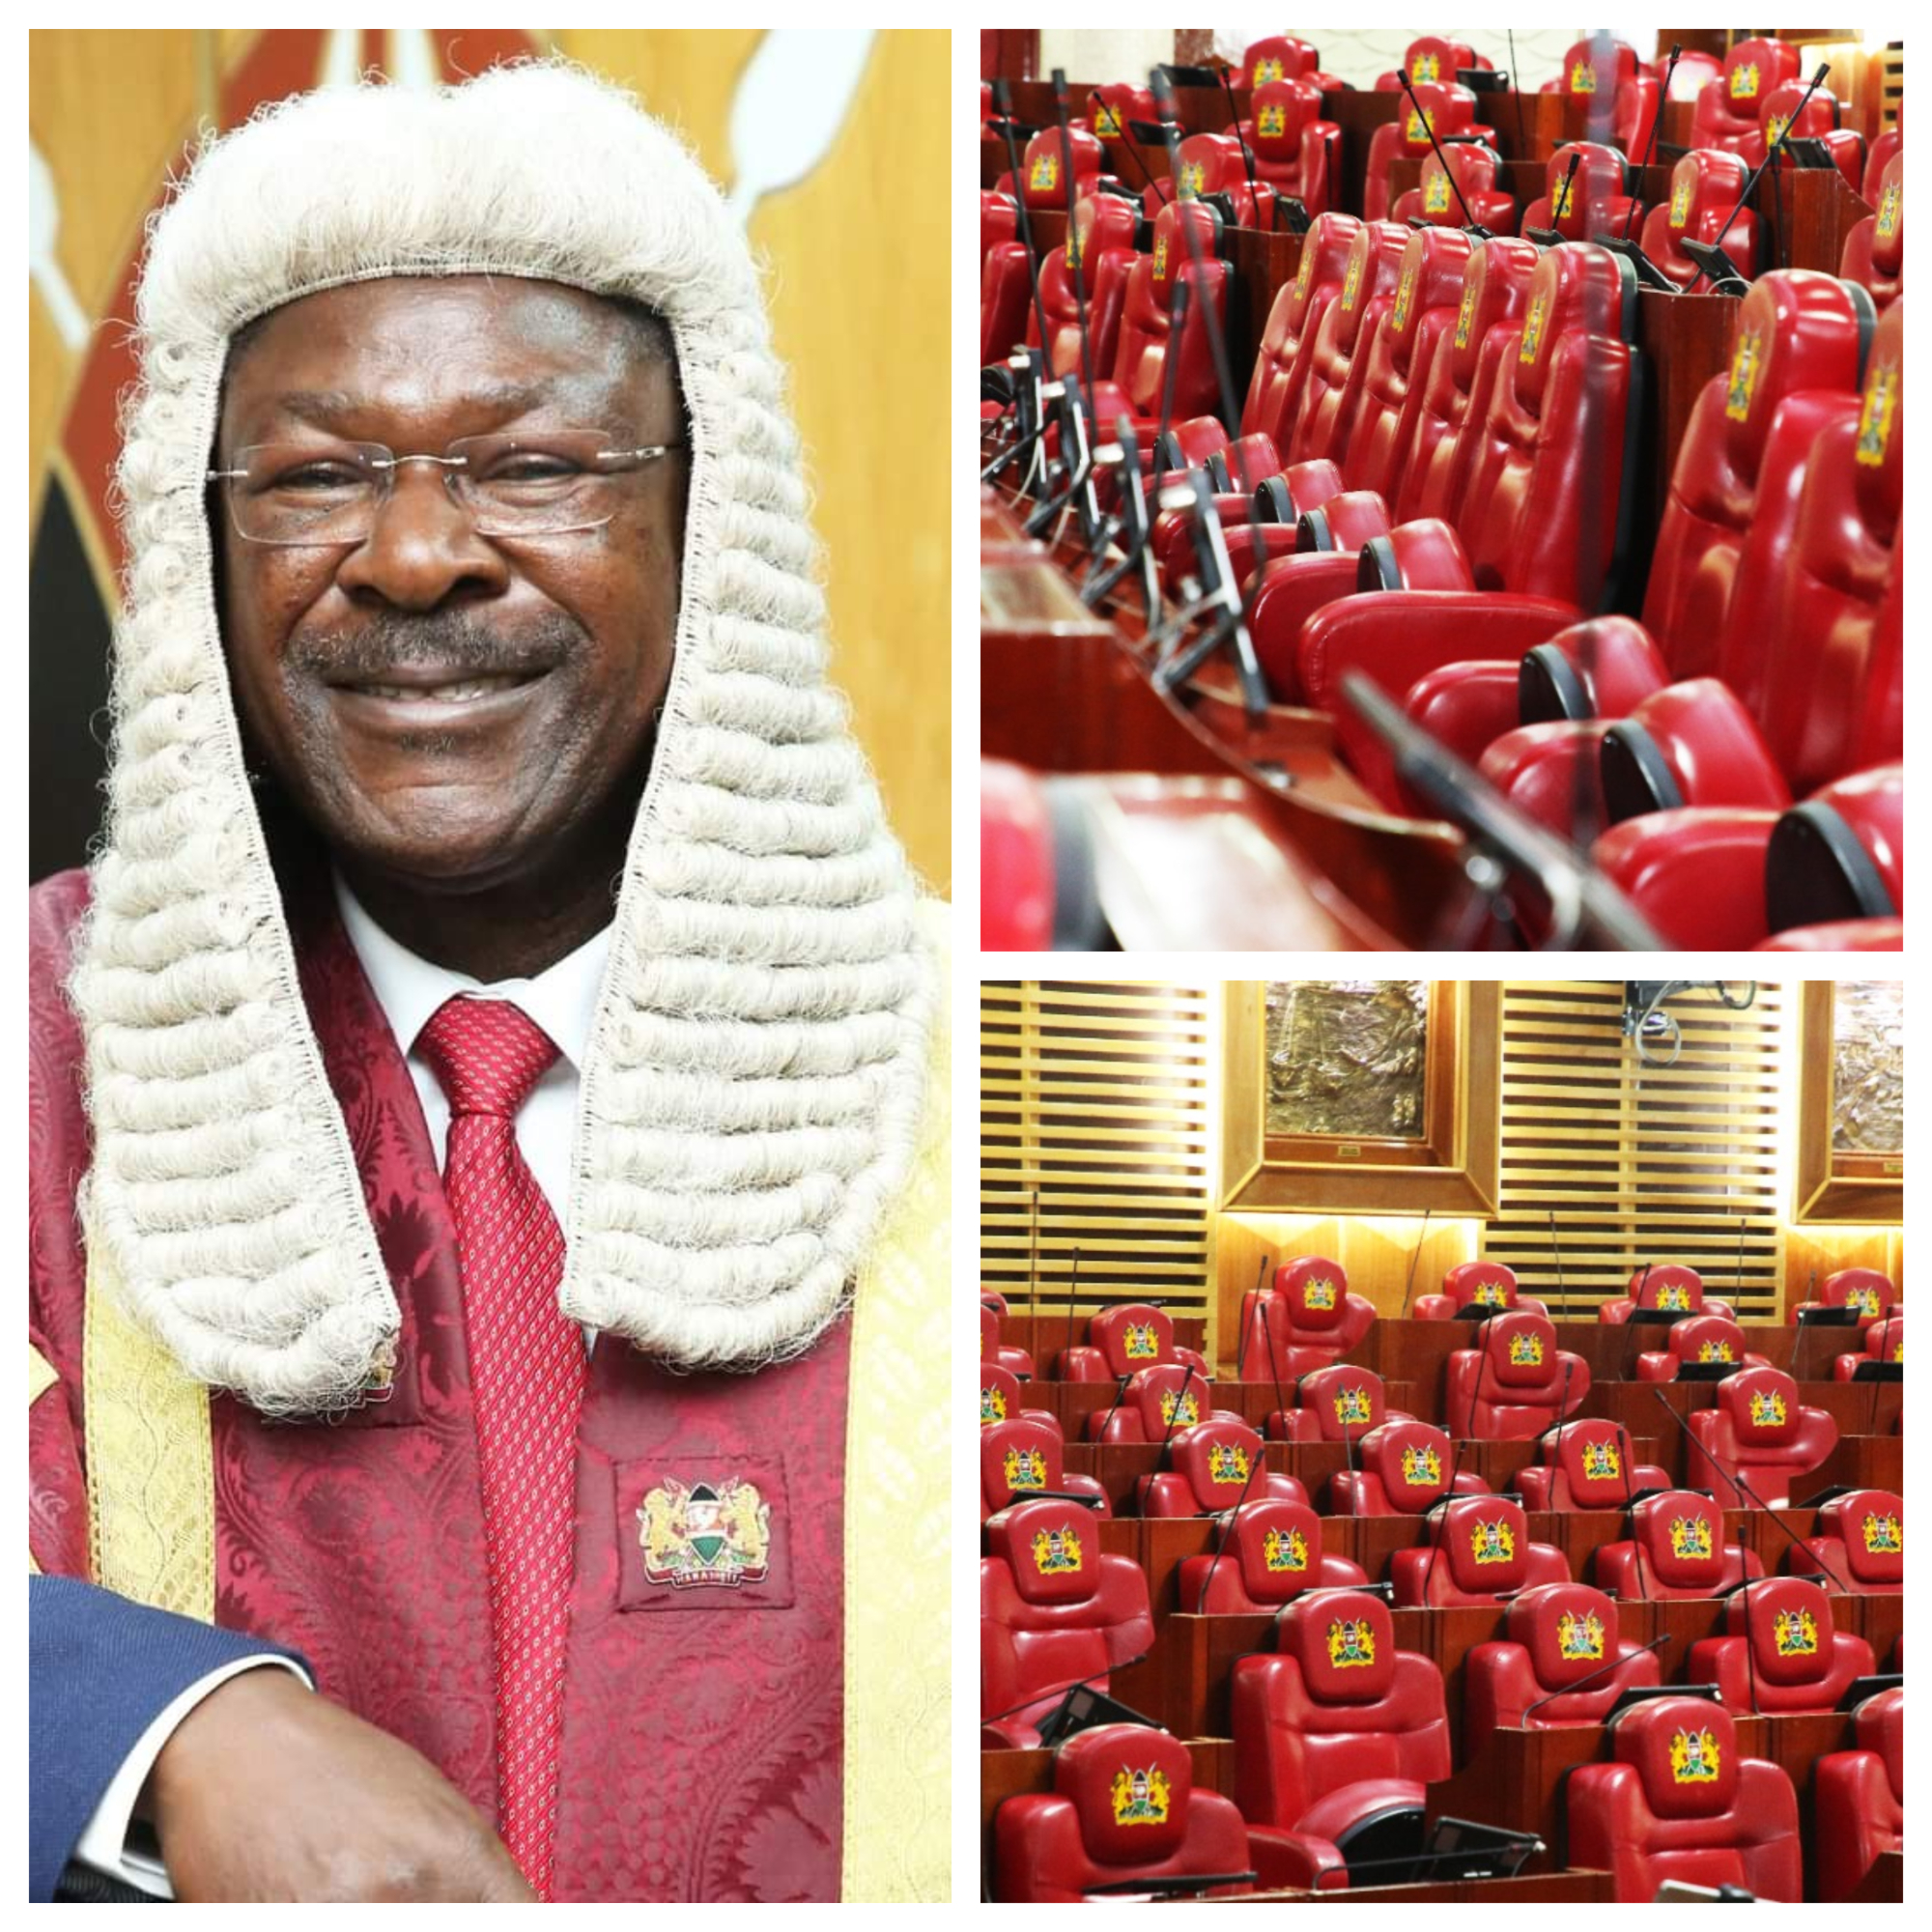 NATIONAL ASSEMBLY SETS GUIDELINES FOR CABINET SECRETARIES' QUESTION TIME